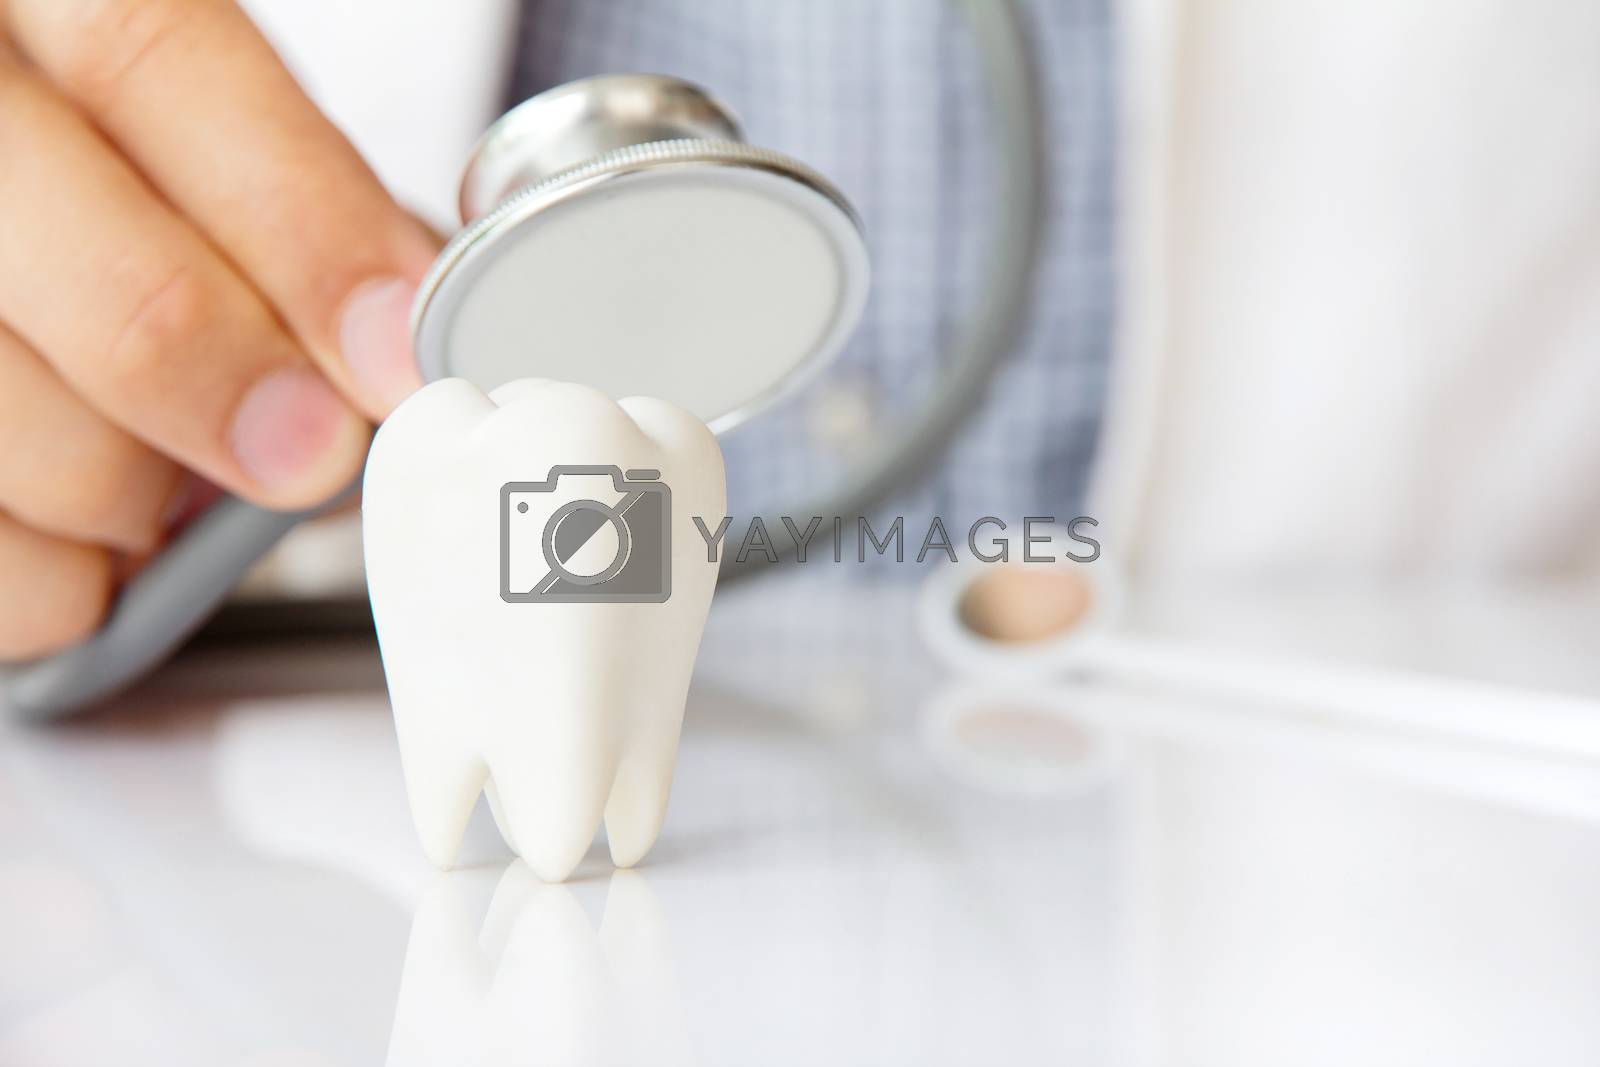 Royalty free image of dental concept by ponsulak